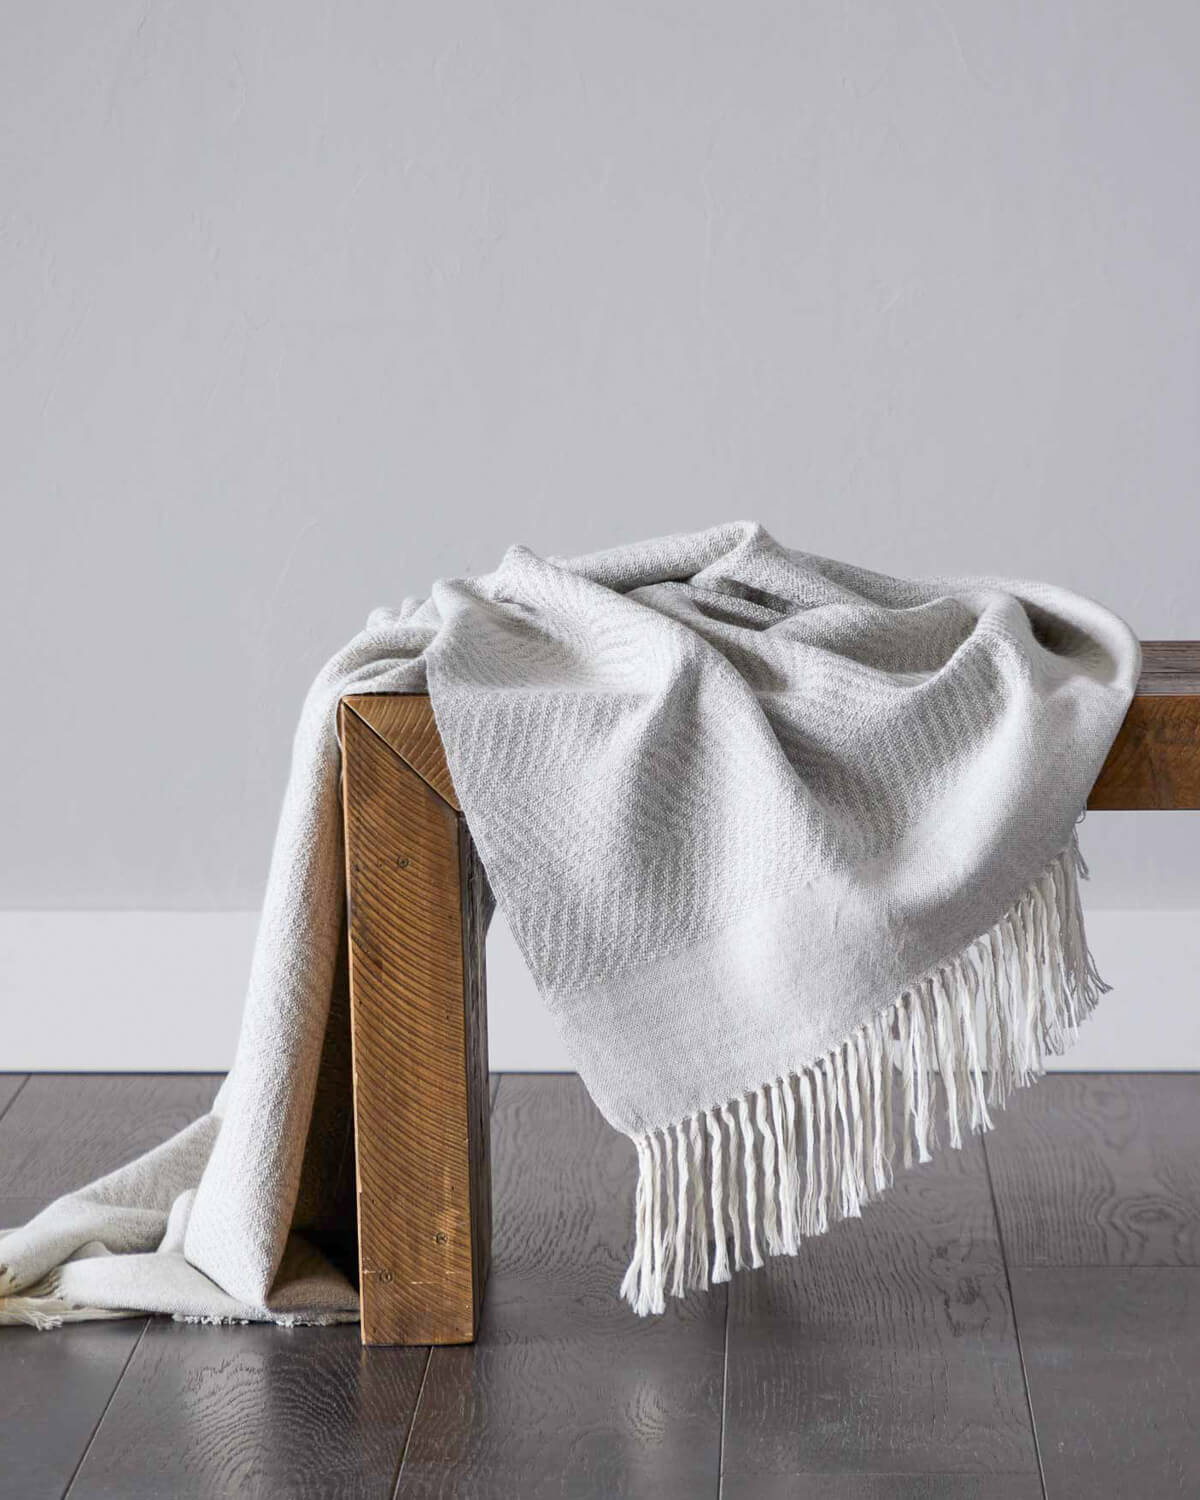 
                  
                    La Loma blanket handwoven in Peru luxury and one of a kind gift made by master artisans.
                  
                